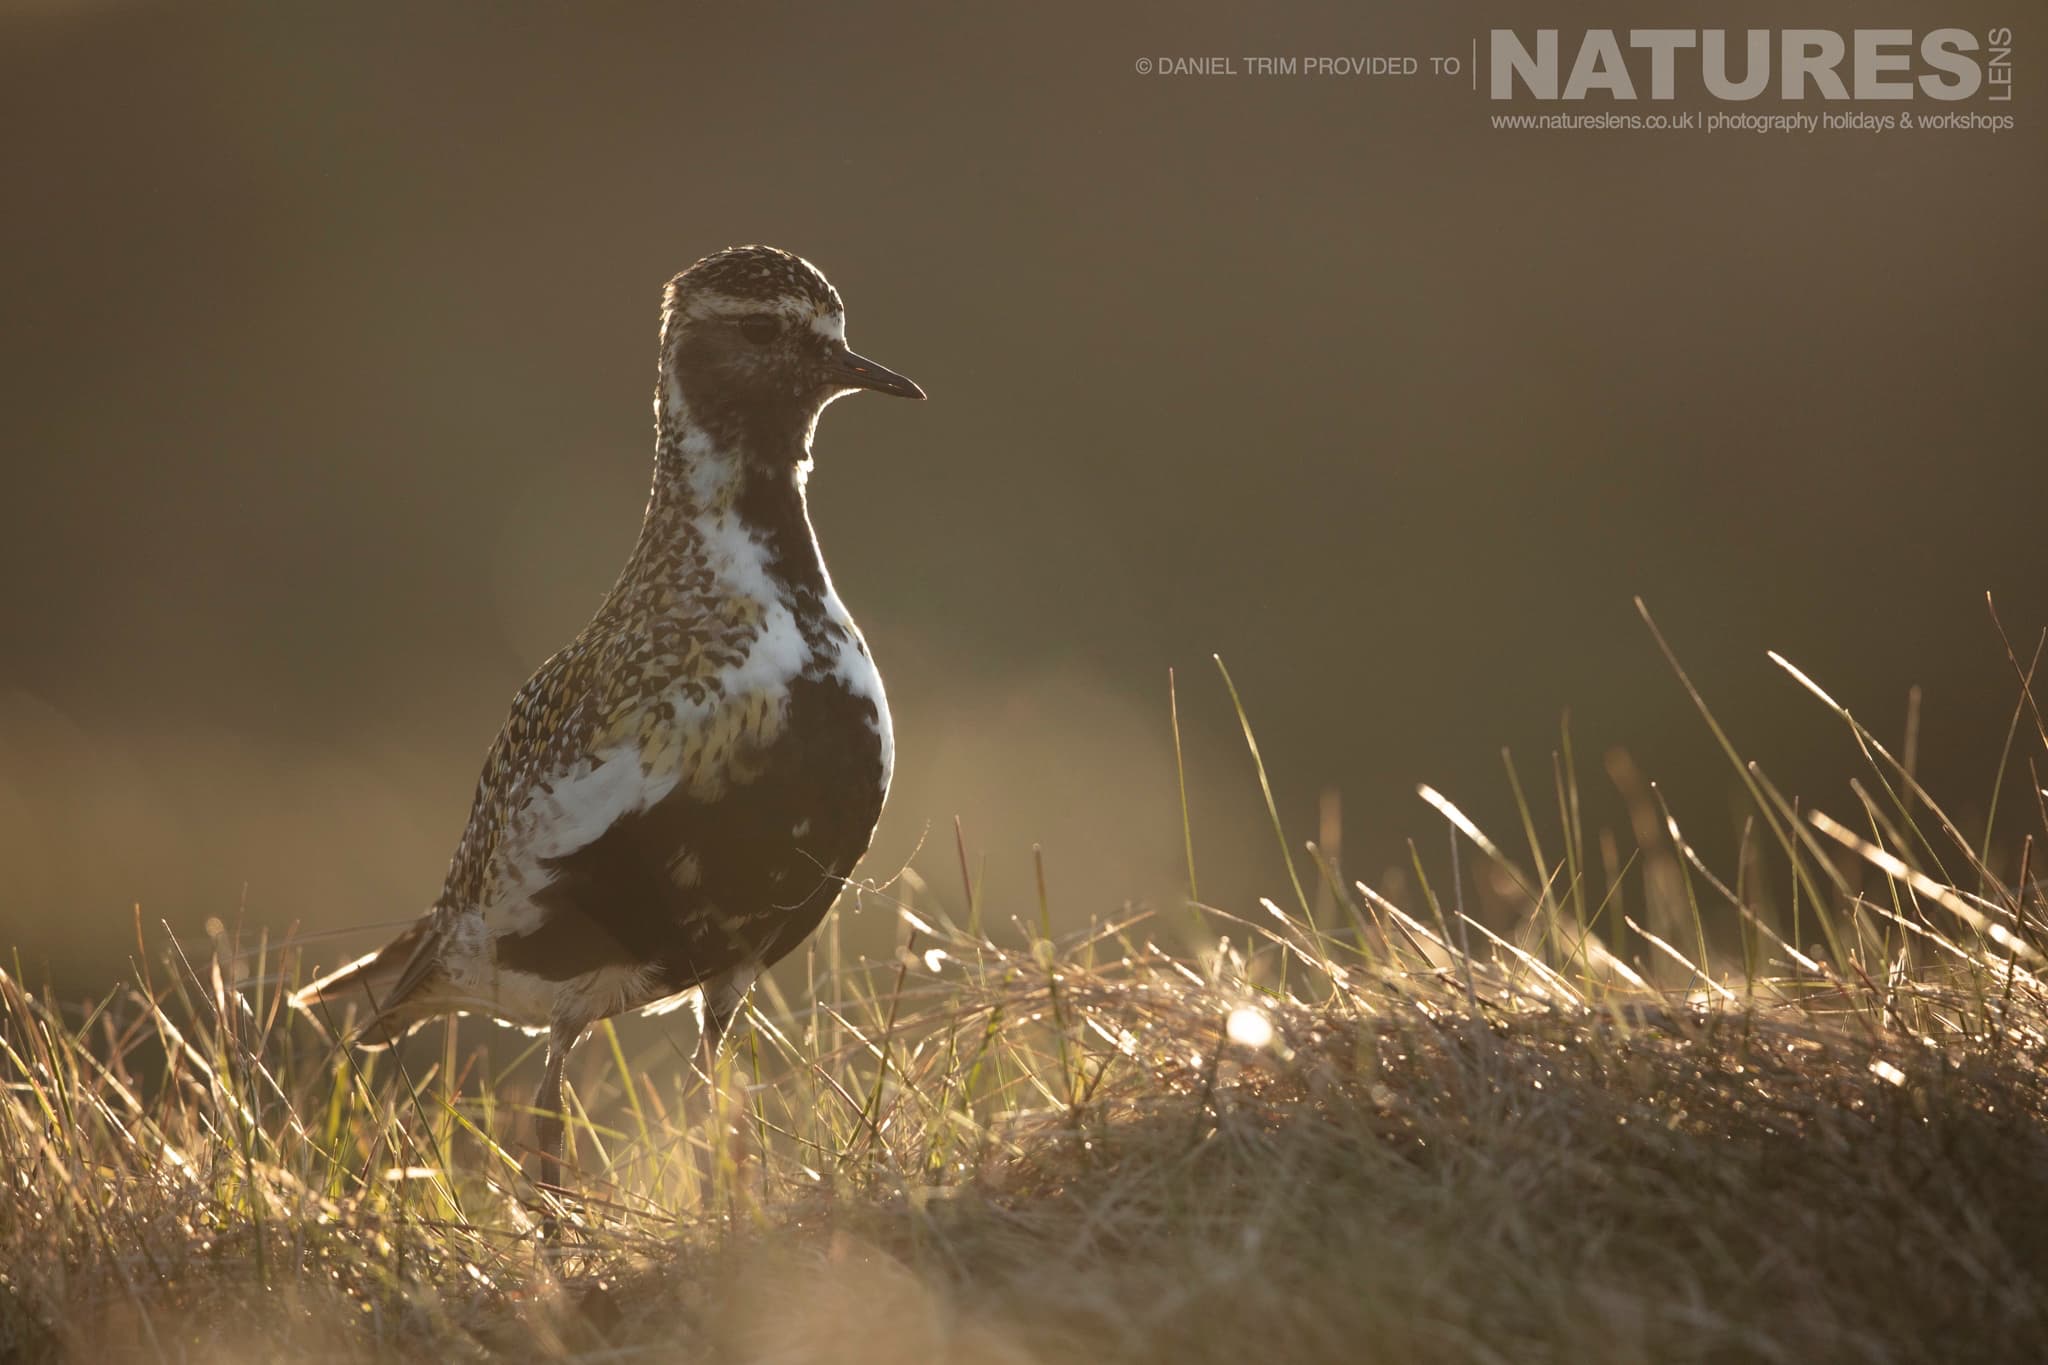 One Of Grimsey Island's Supporting Cast This Time A Golden Plover Photographed During The Natureslens Puffins Of The Arctic Circle Photography Holiday